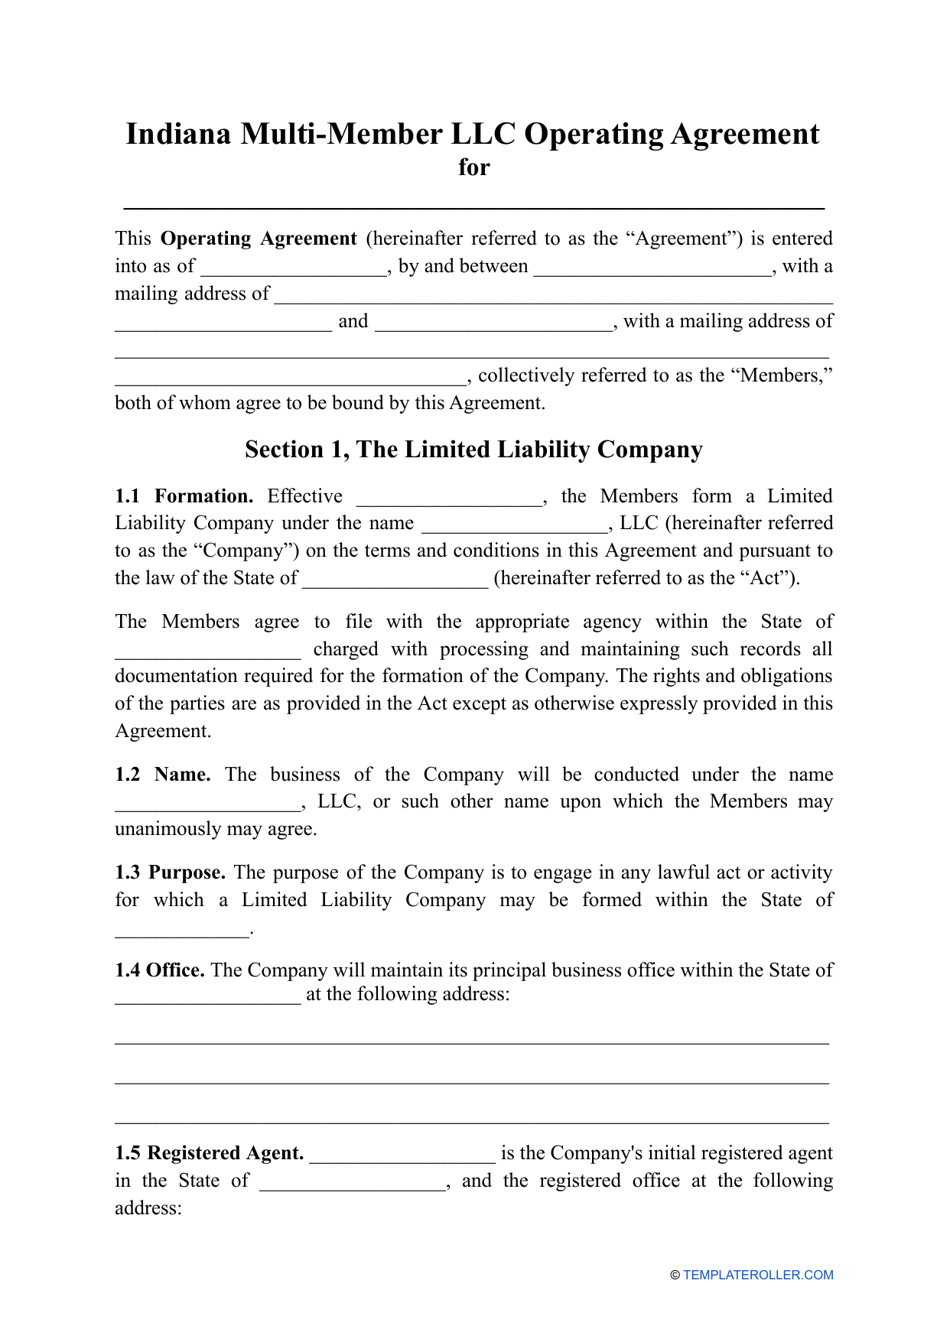 Multi-Member LLC Operating Agreement Template - Indiana, Page 1